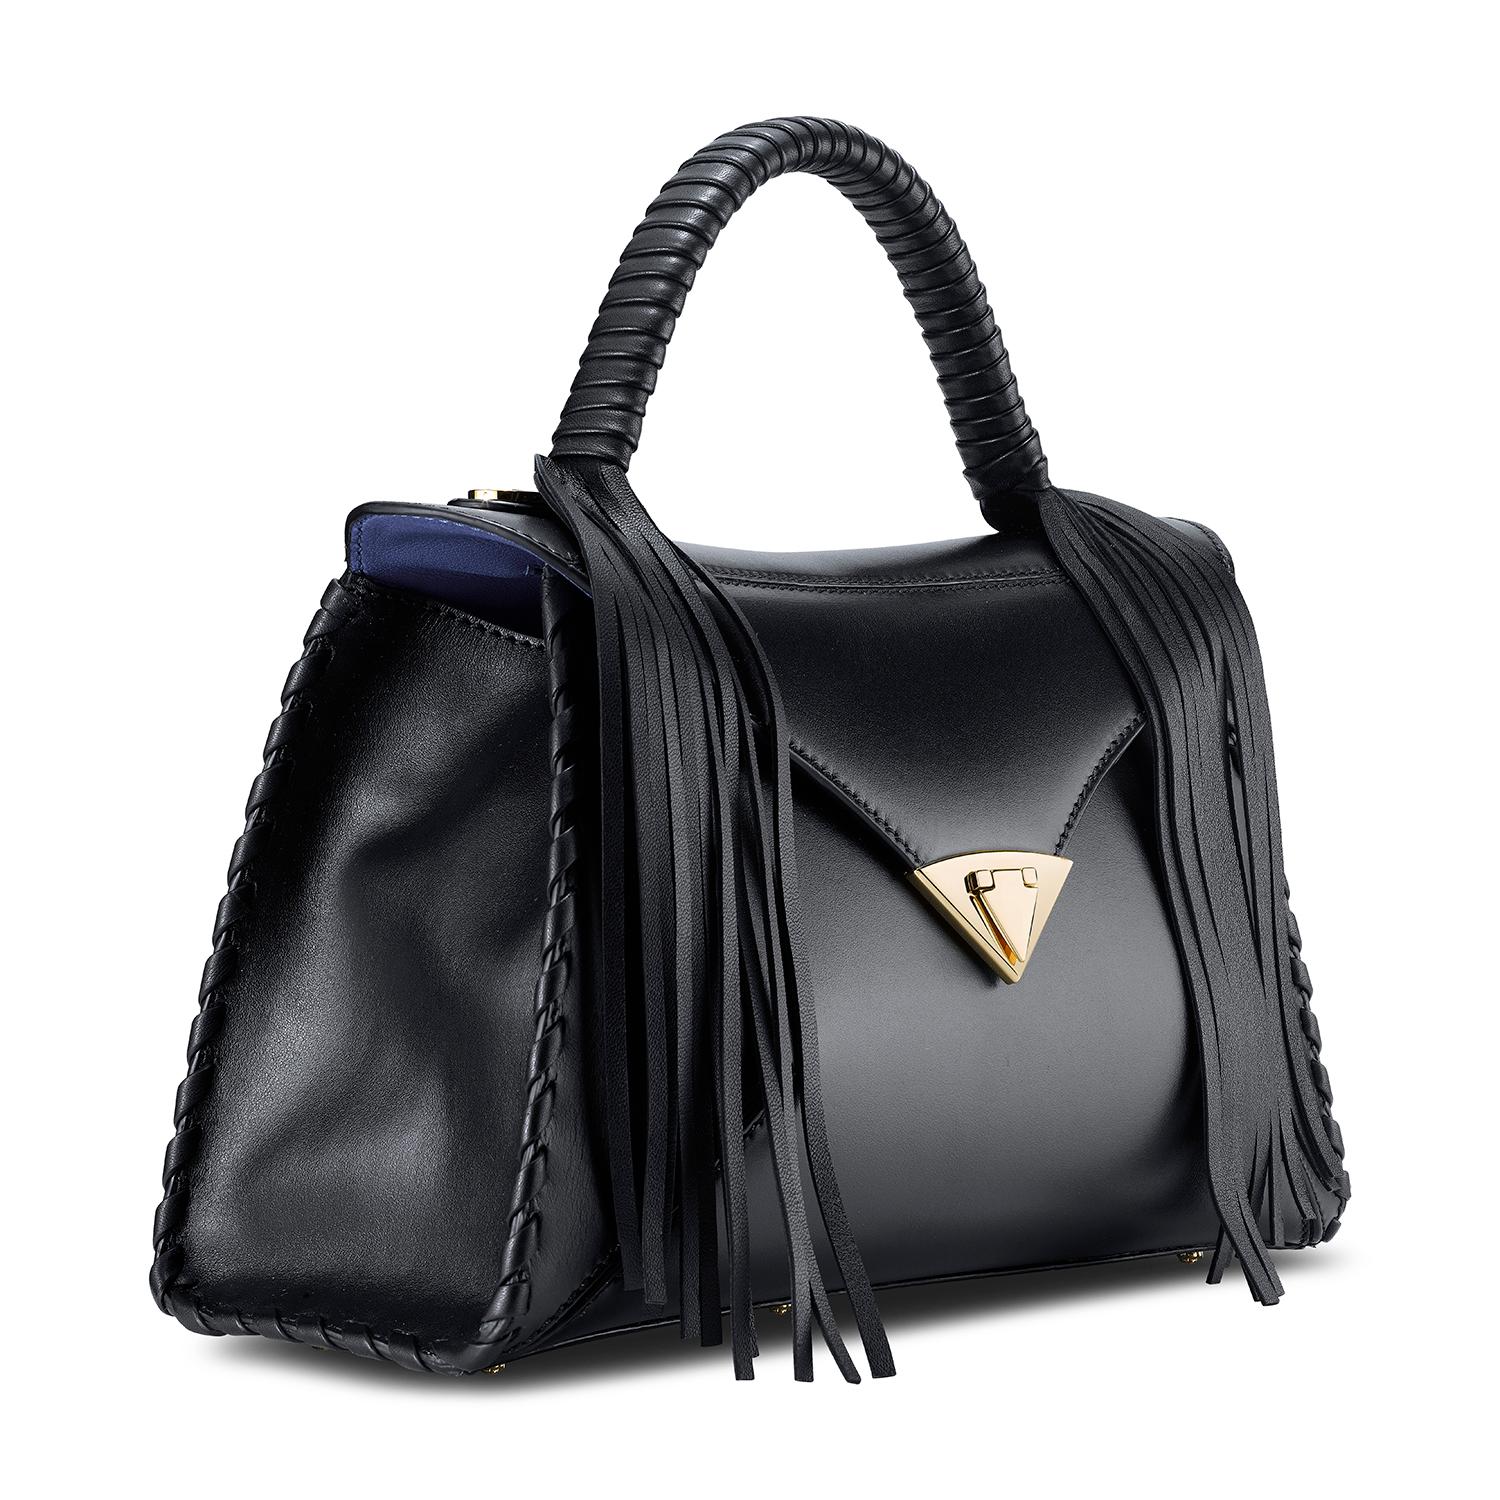 The LJ in Black Leather Gold Hardware is a semi-structured handbag with a triangular front-flap and our custom spear-lock closure. It is designed with a top-handle, handmade whipstitch detail and an optional chain. It has a hidden back pocket,